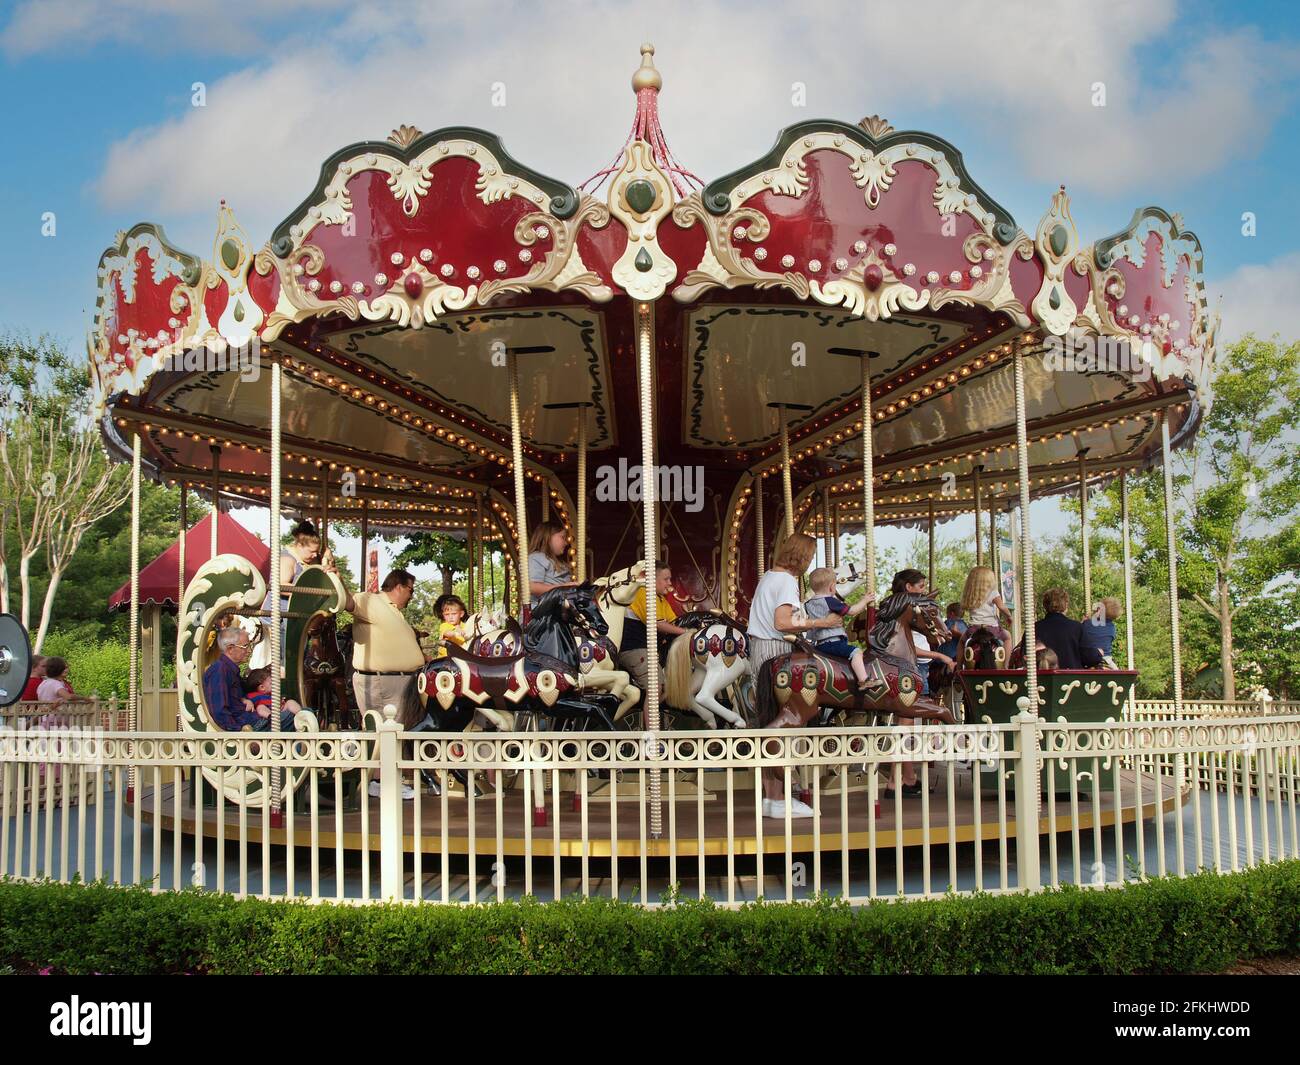 A vintage carousel ride at Celebration City Theme Park in Branson, Missouri provided summer fun from days gone. Stock Photo